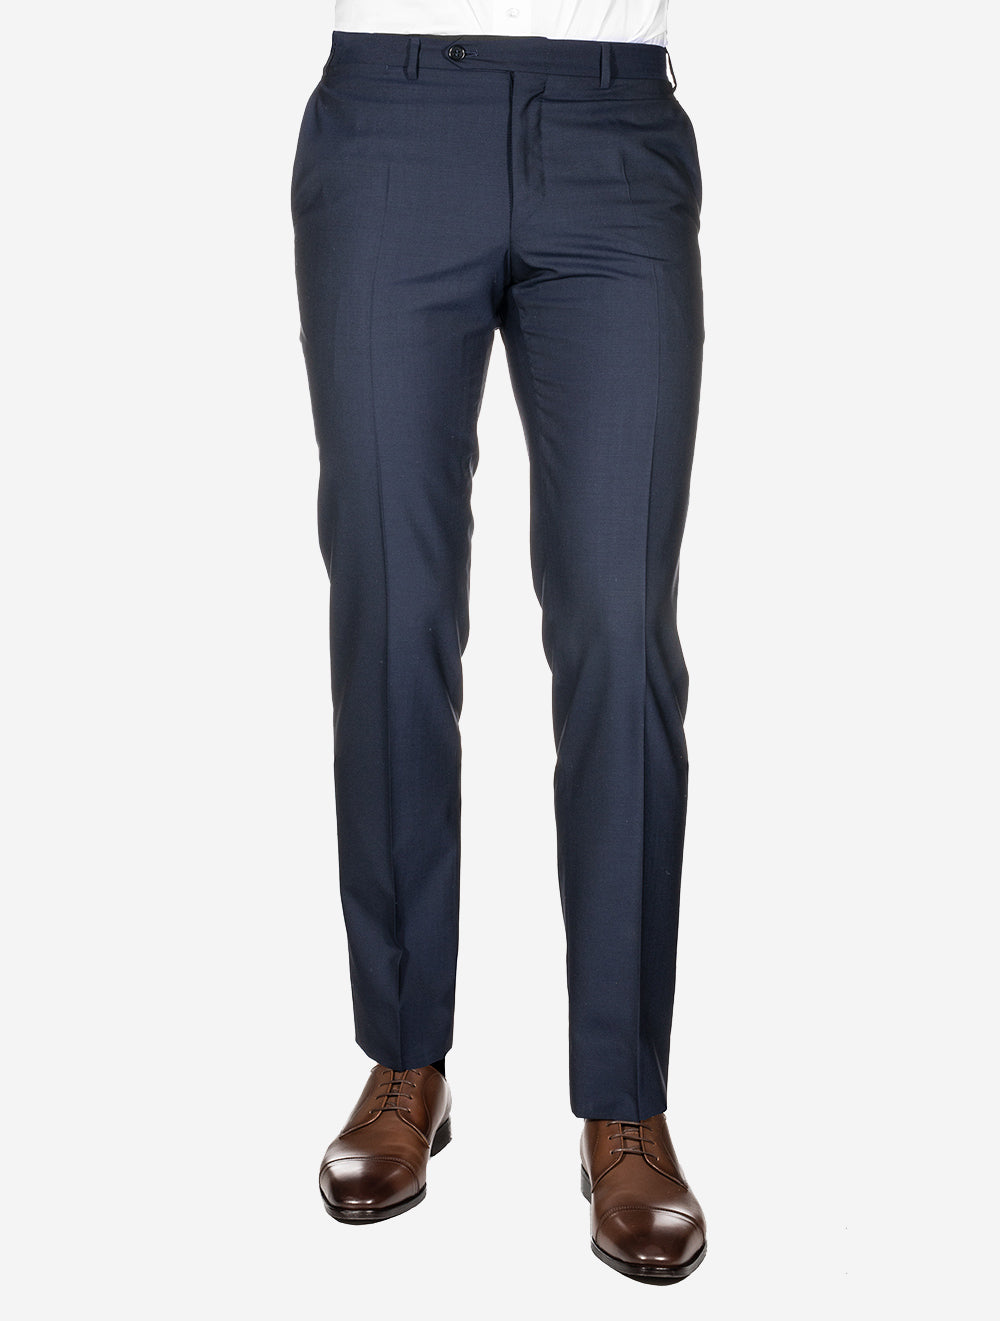 at00552ss24navy301E369canali_wool_trousers_2.jpg